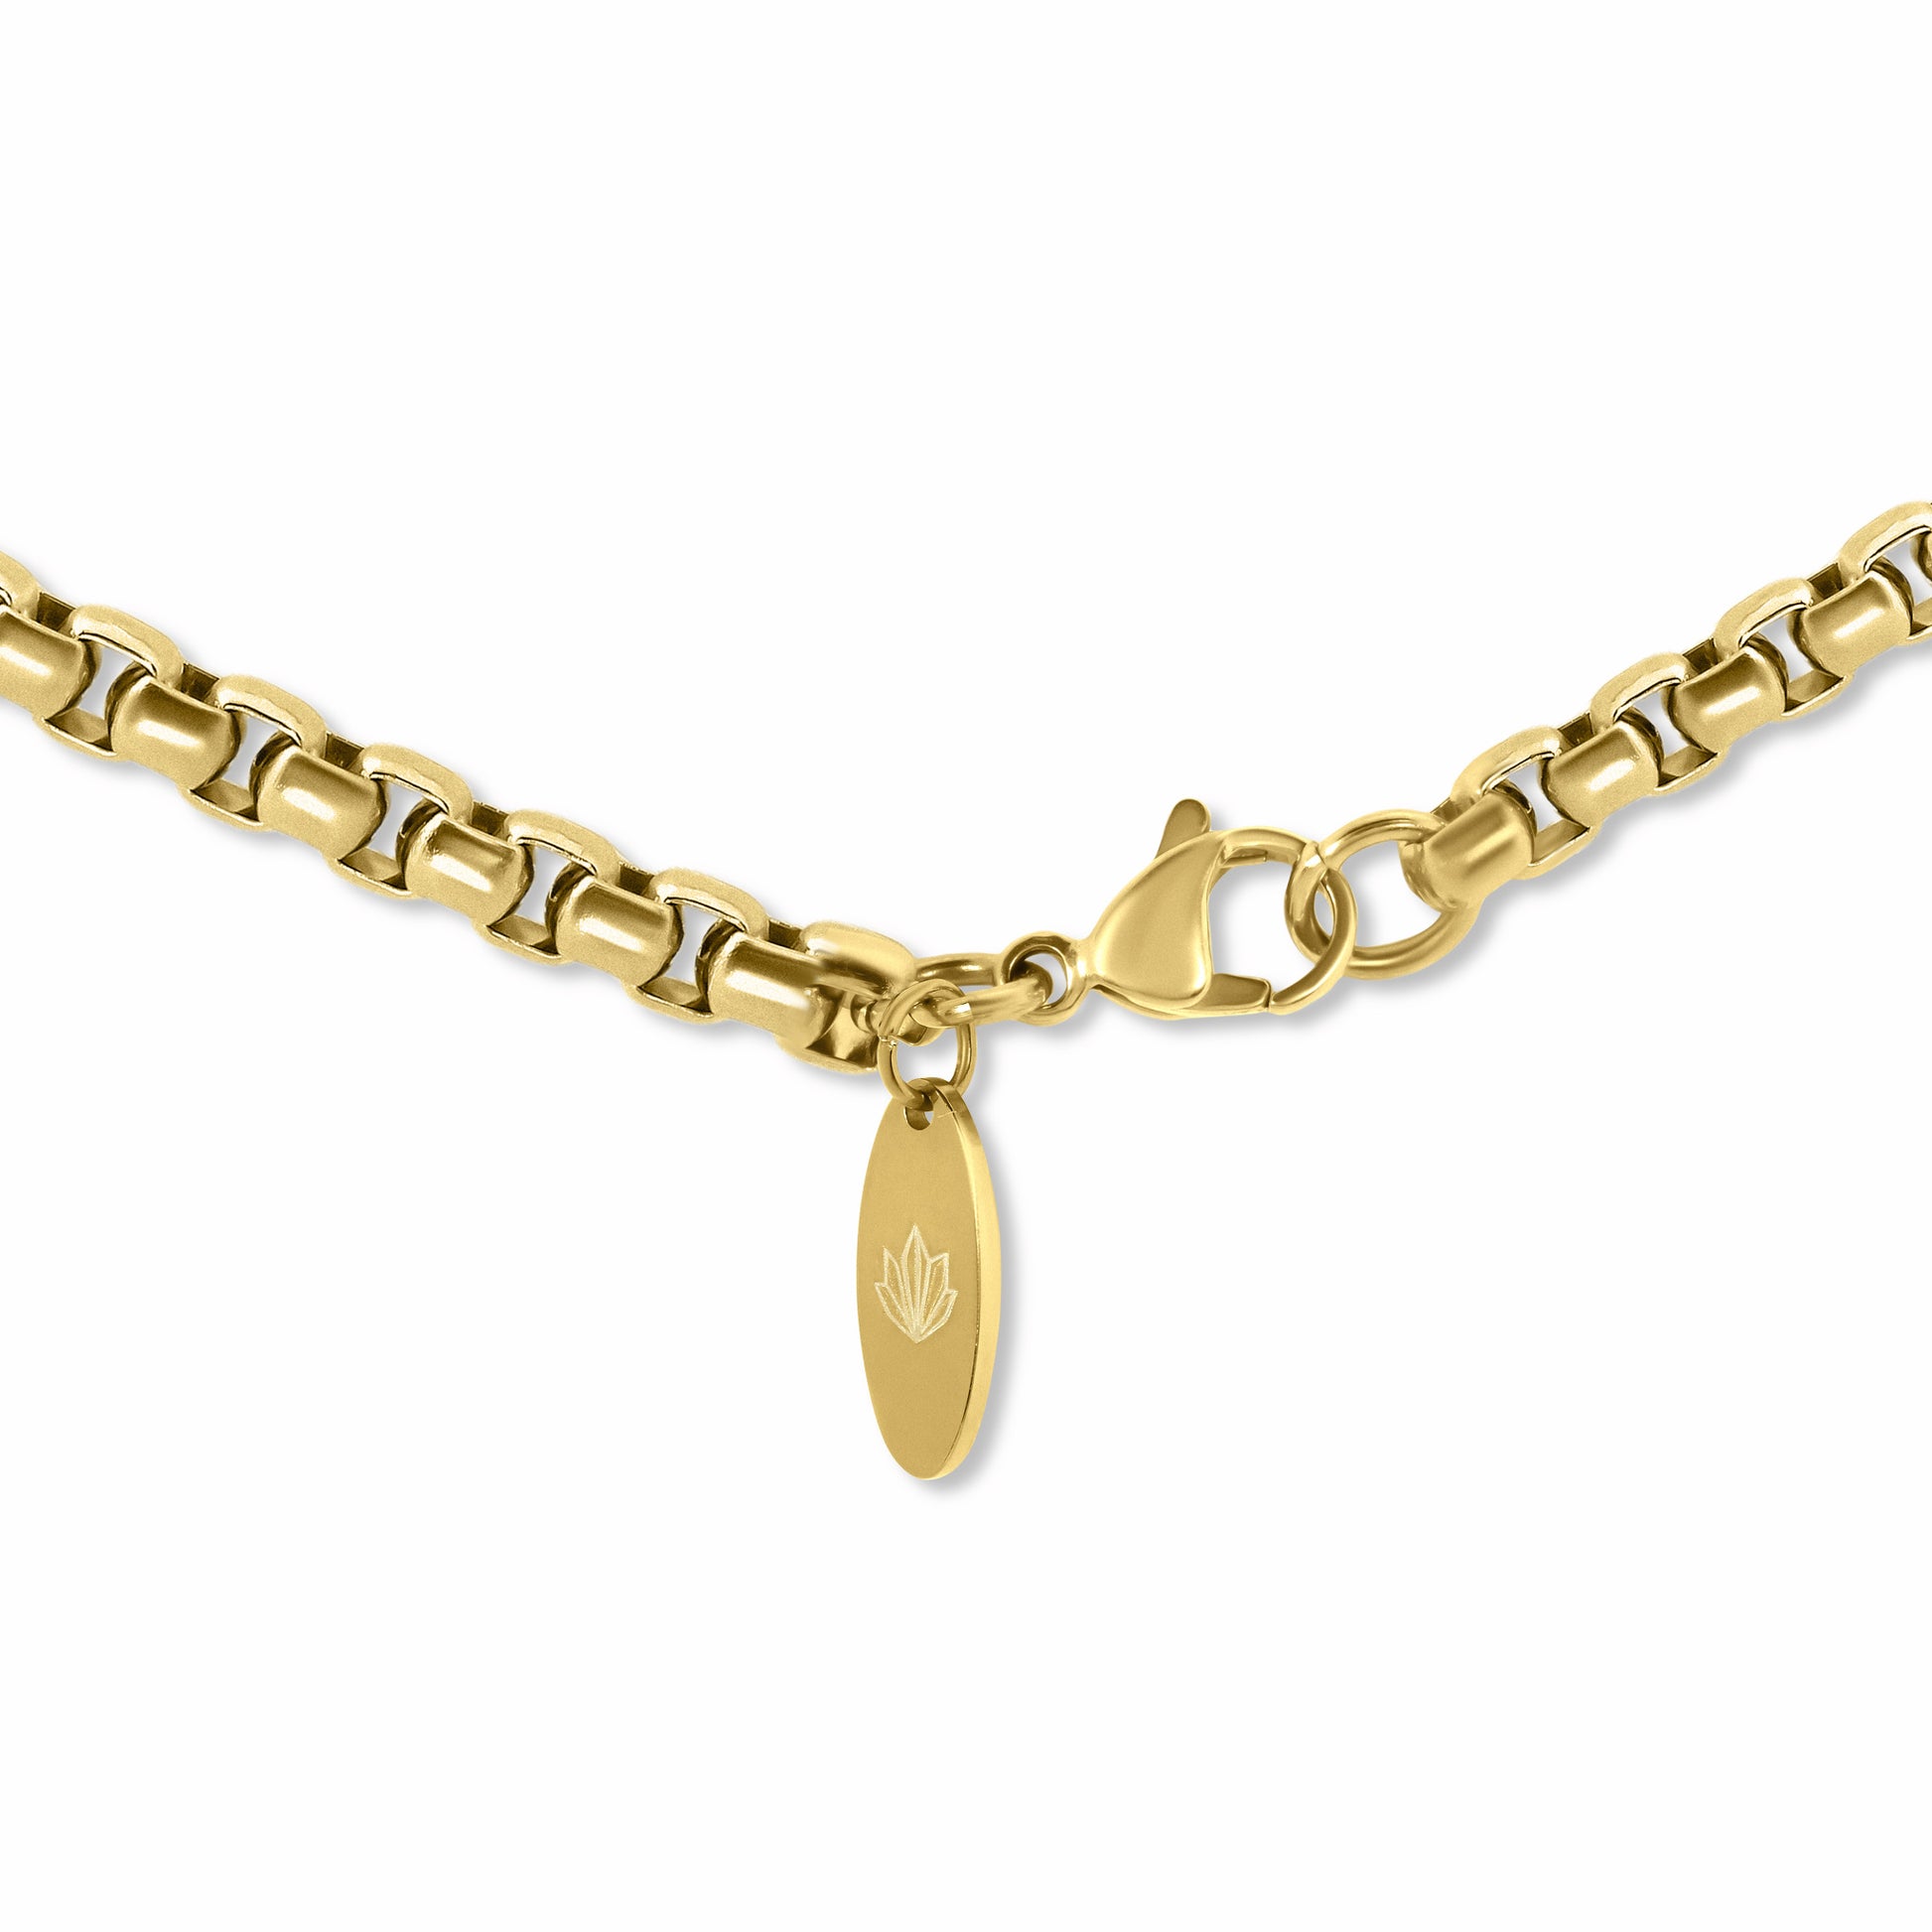 Round Box Link Chain Gold 5mm clasp with engraved logo tag on a white background